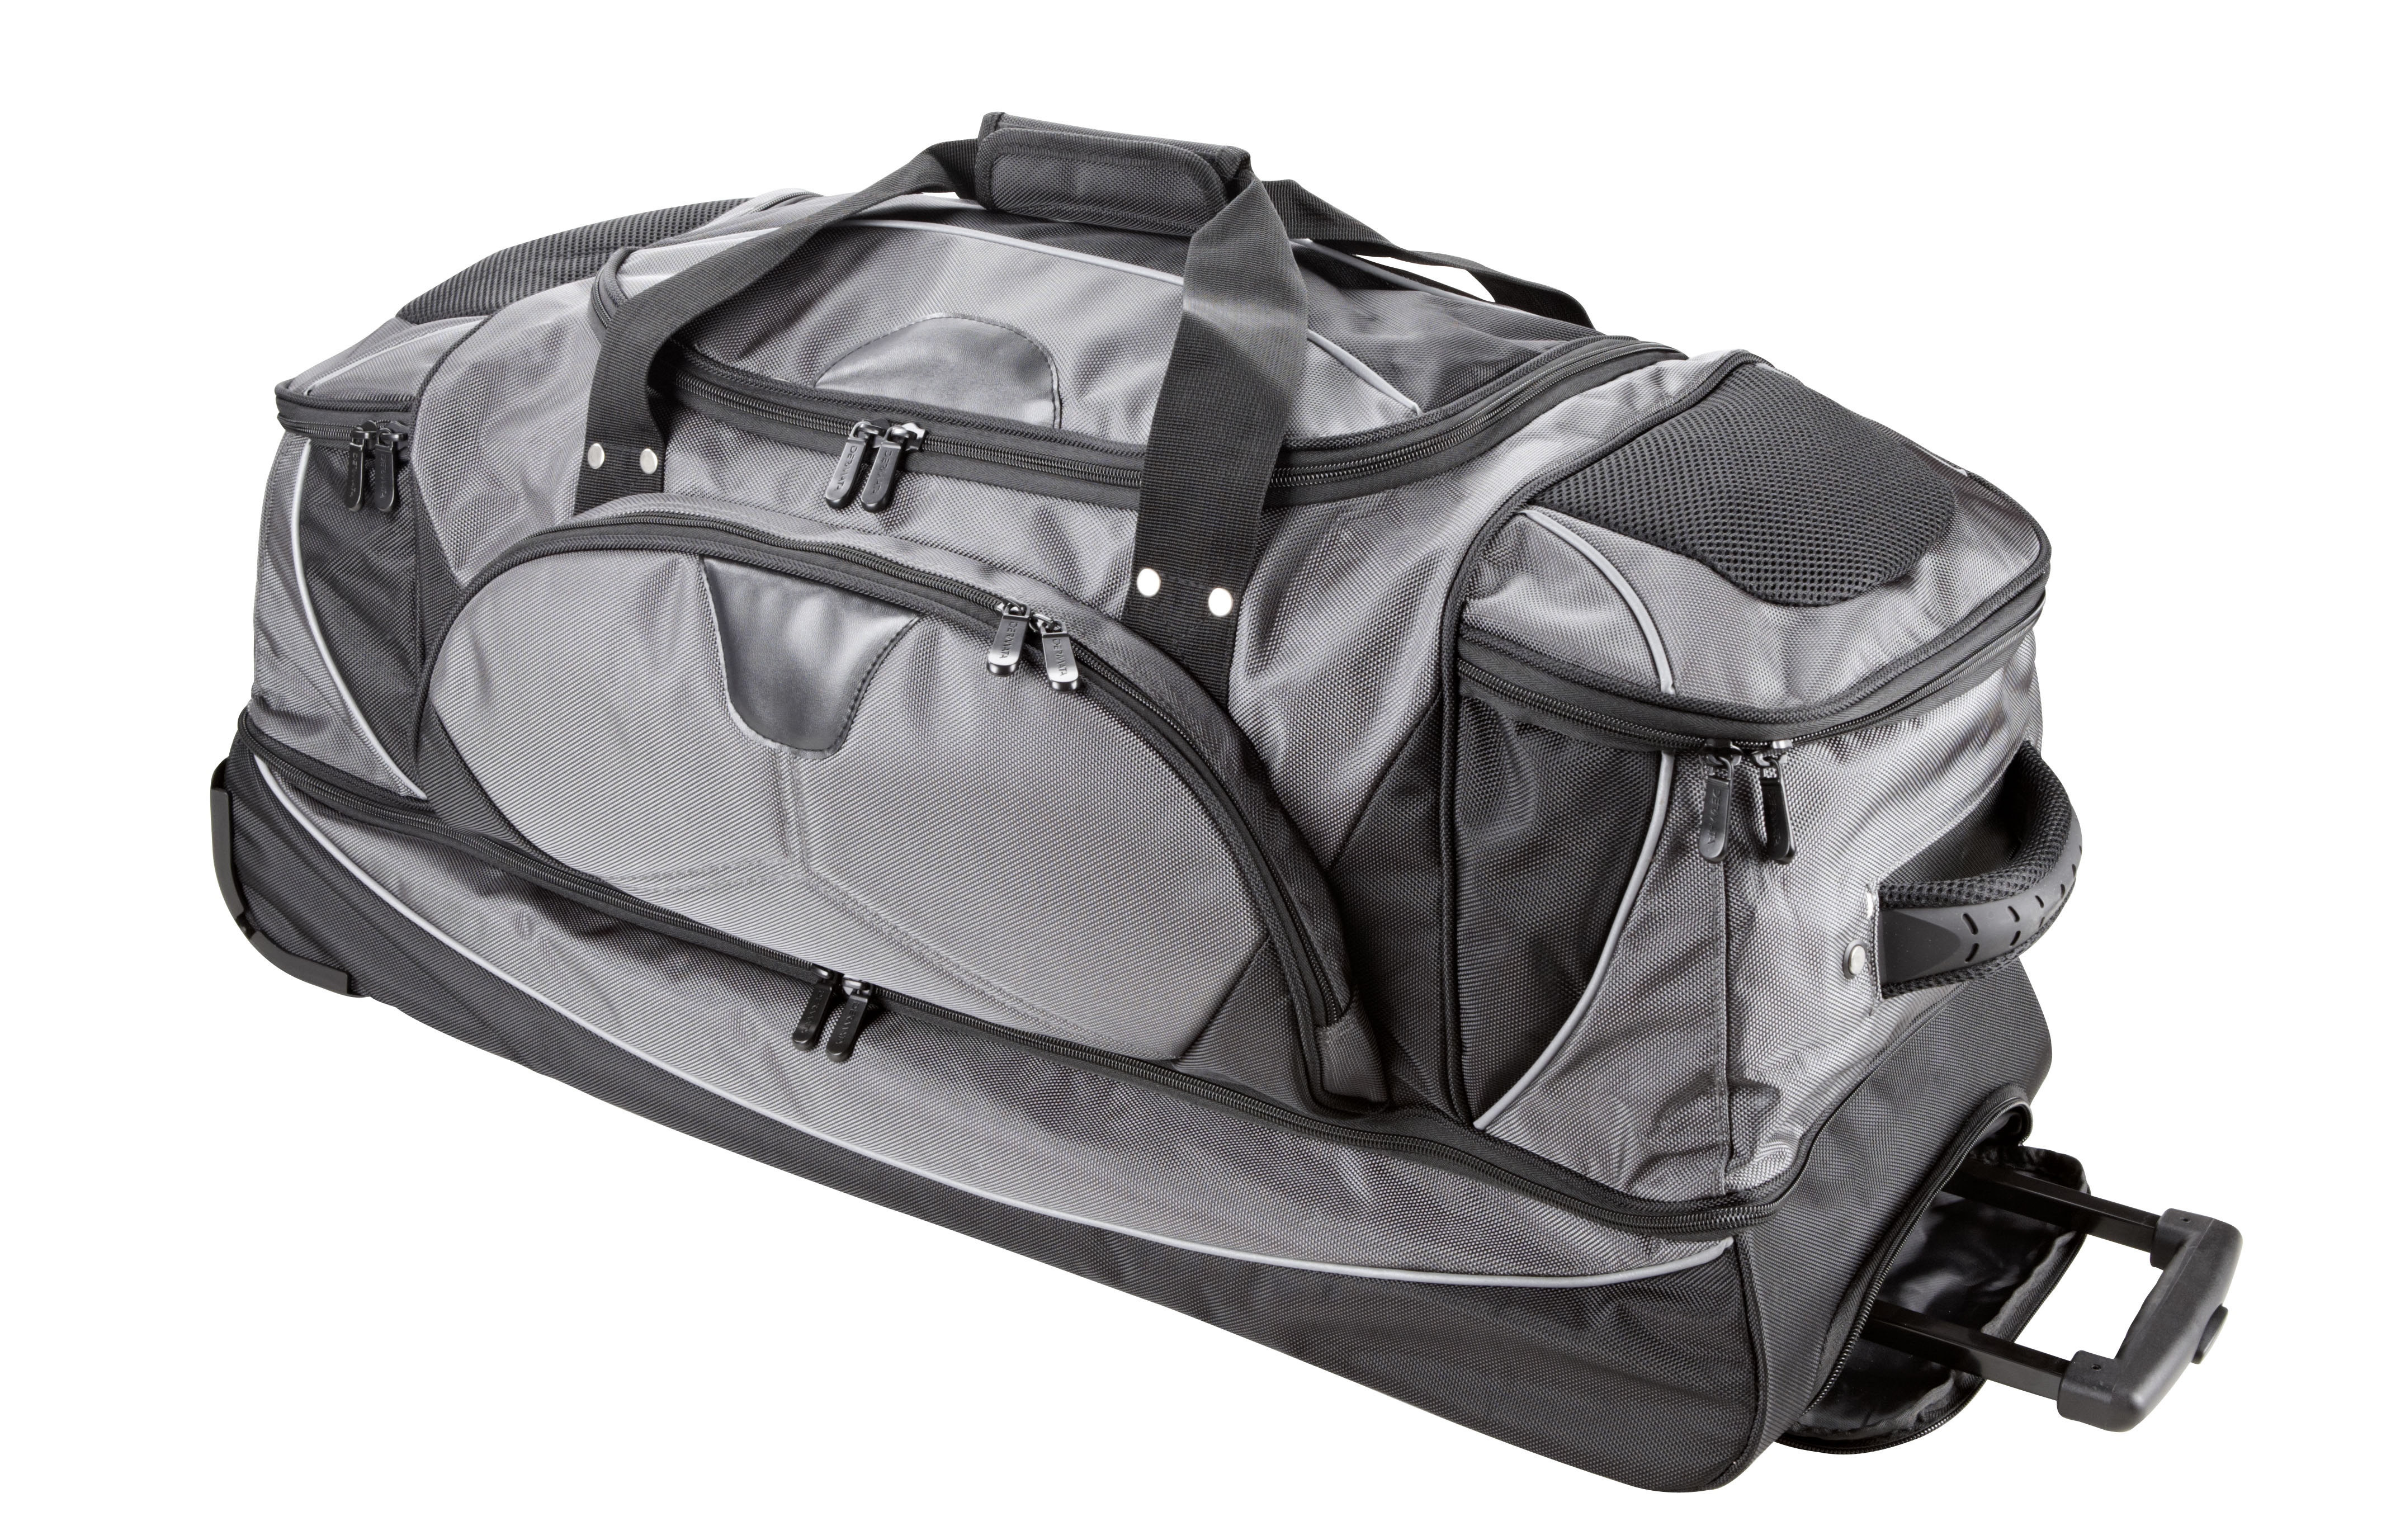 Columbia swissgear etc Wheeled Duffle Travel Bag - 26 Inch Large Rolling Lightweight Luggage Bags for Men